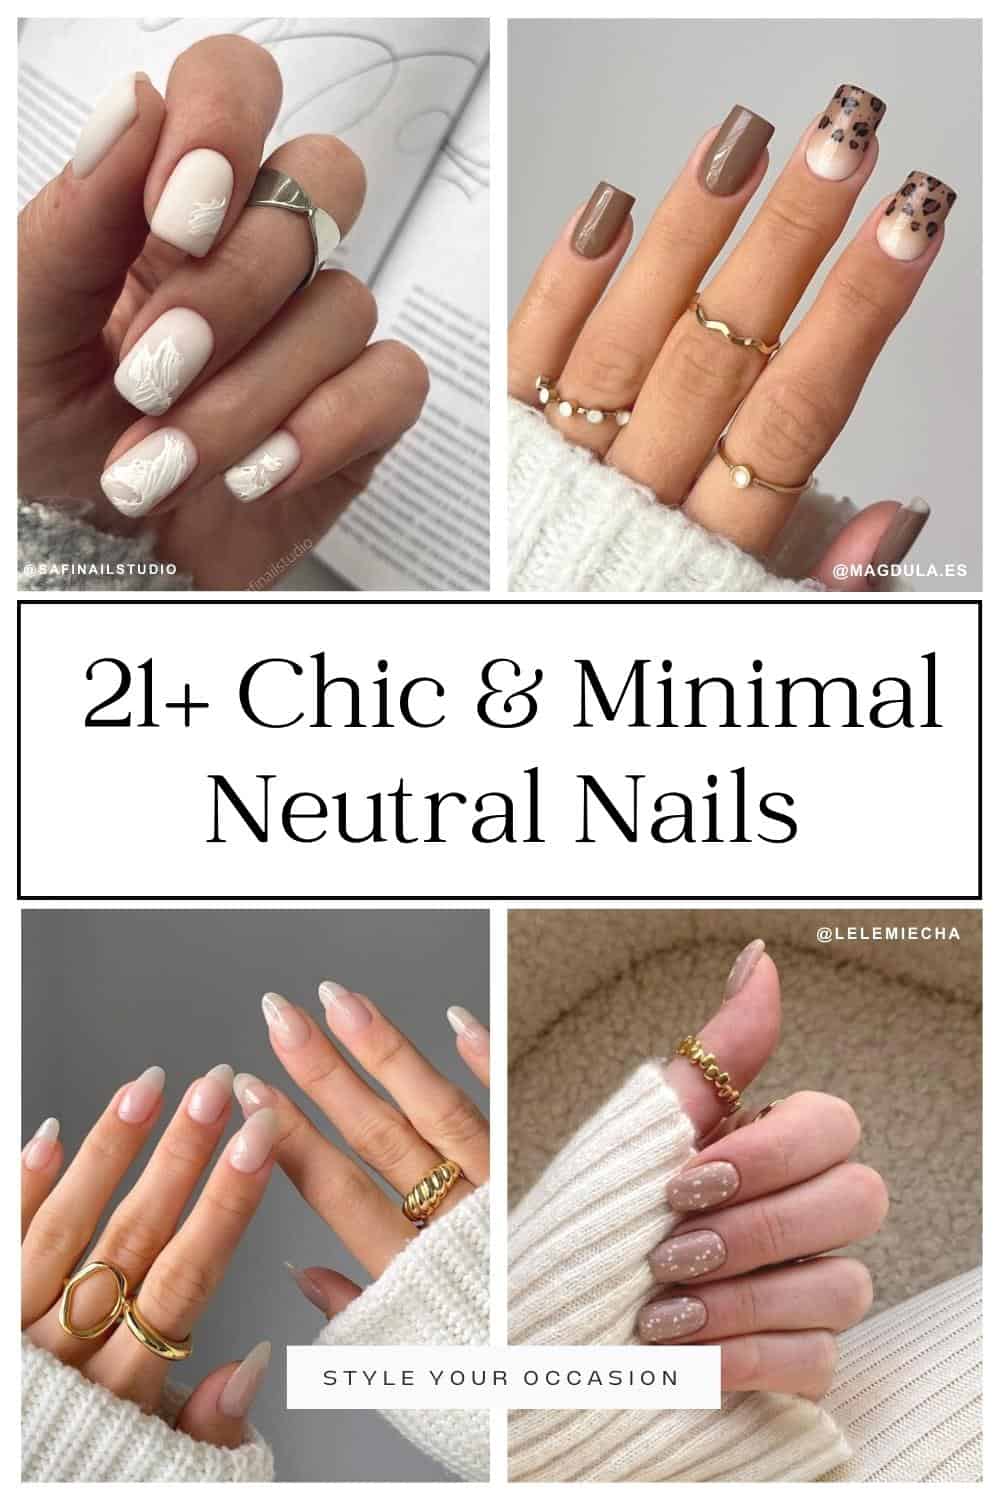 collage of hands with neutral nails